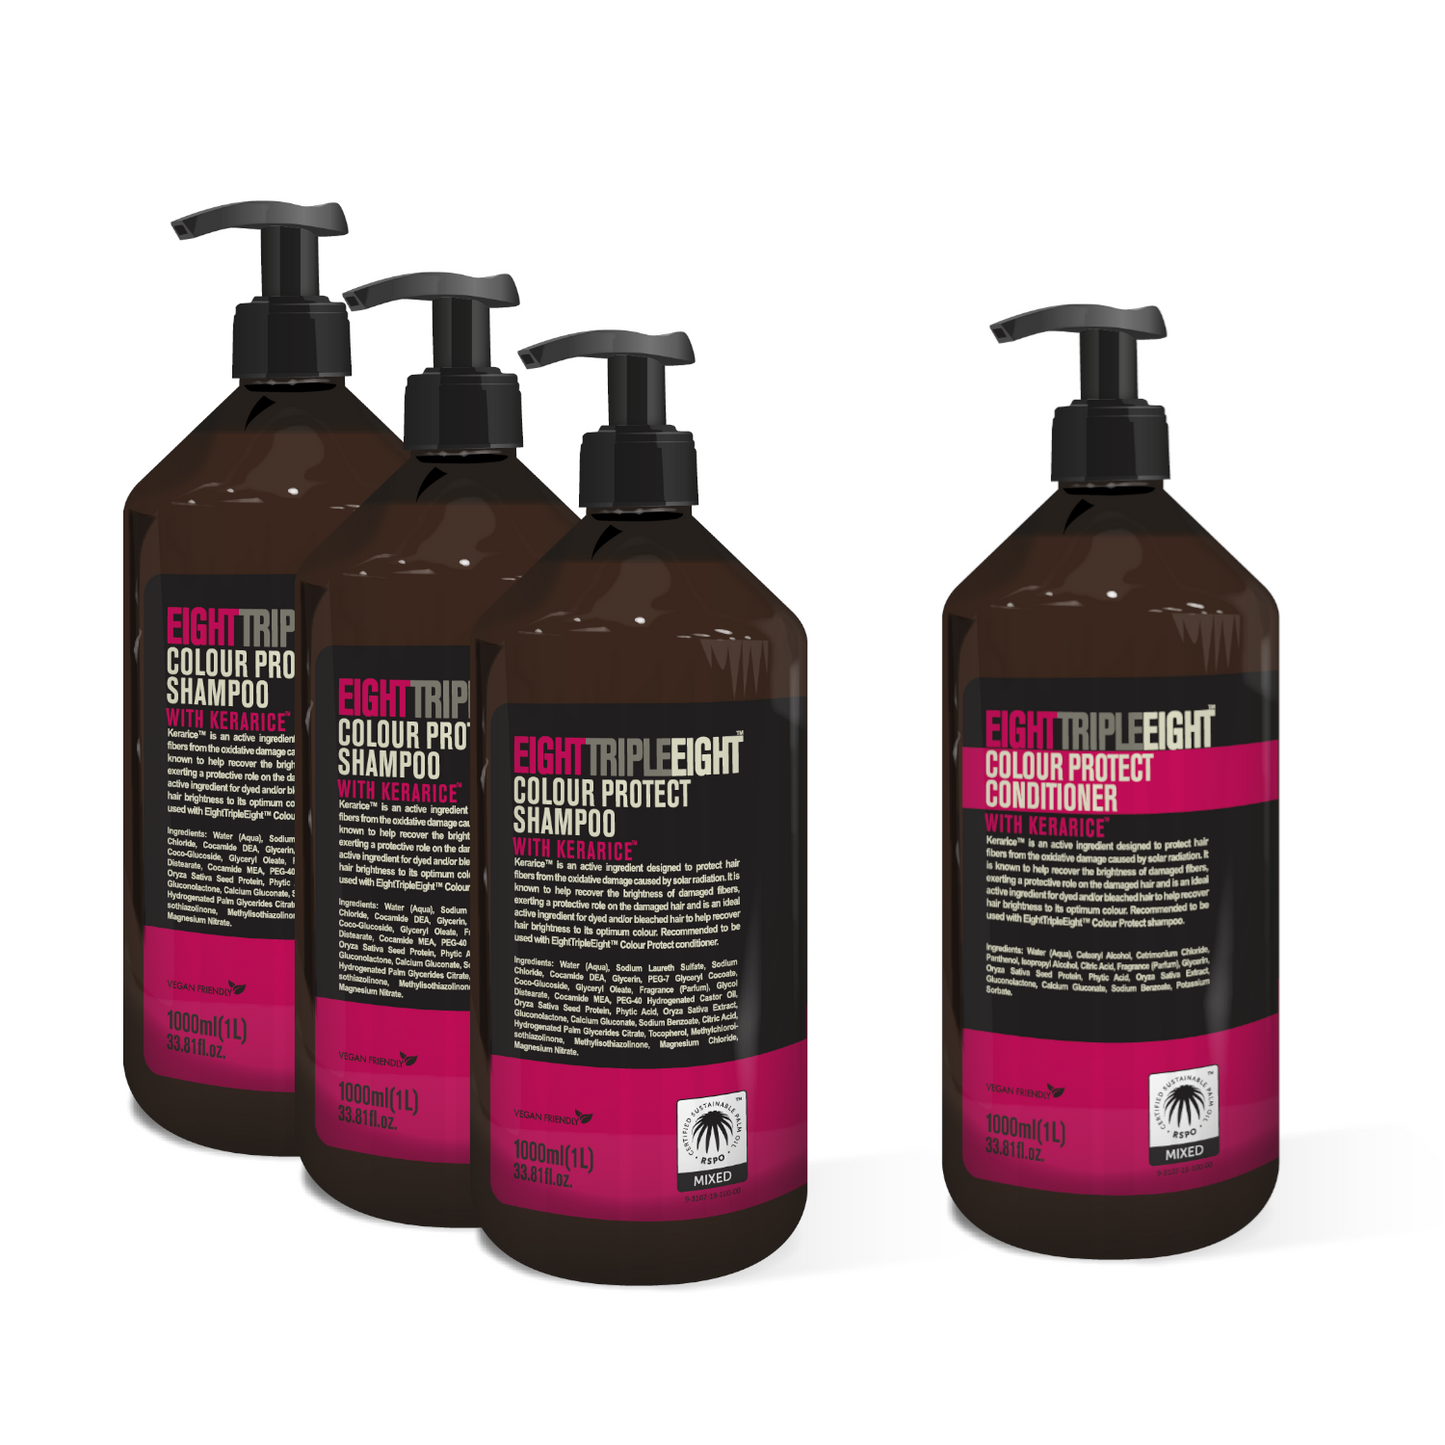 EightTripleEight Colour Protect With Kerarice Set 3x Shampoo & 1x Conditioner 1L